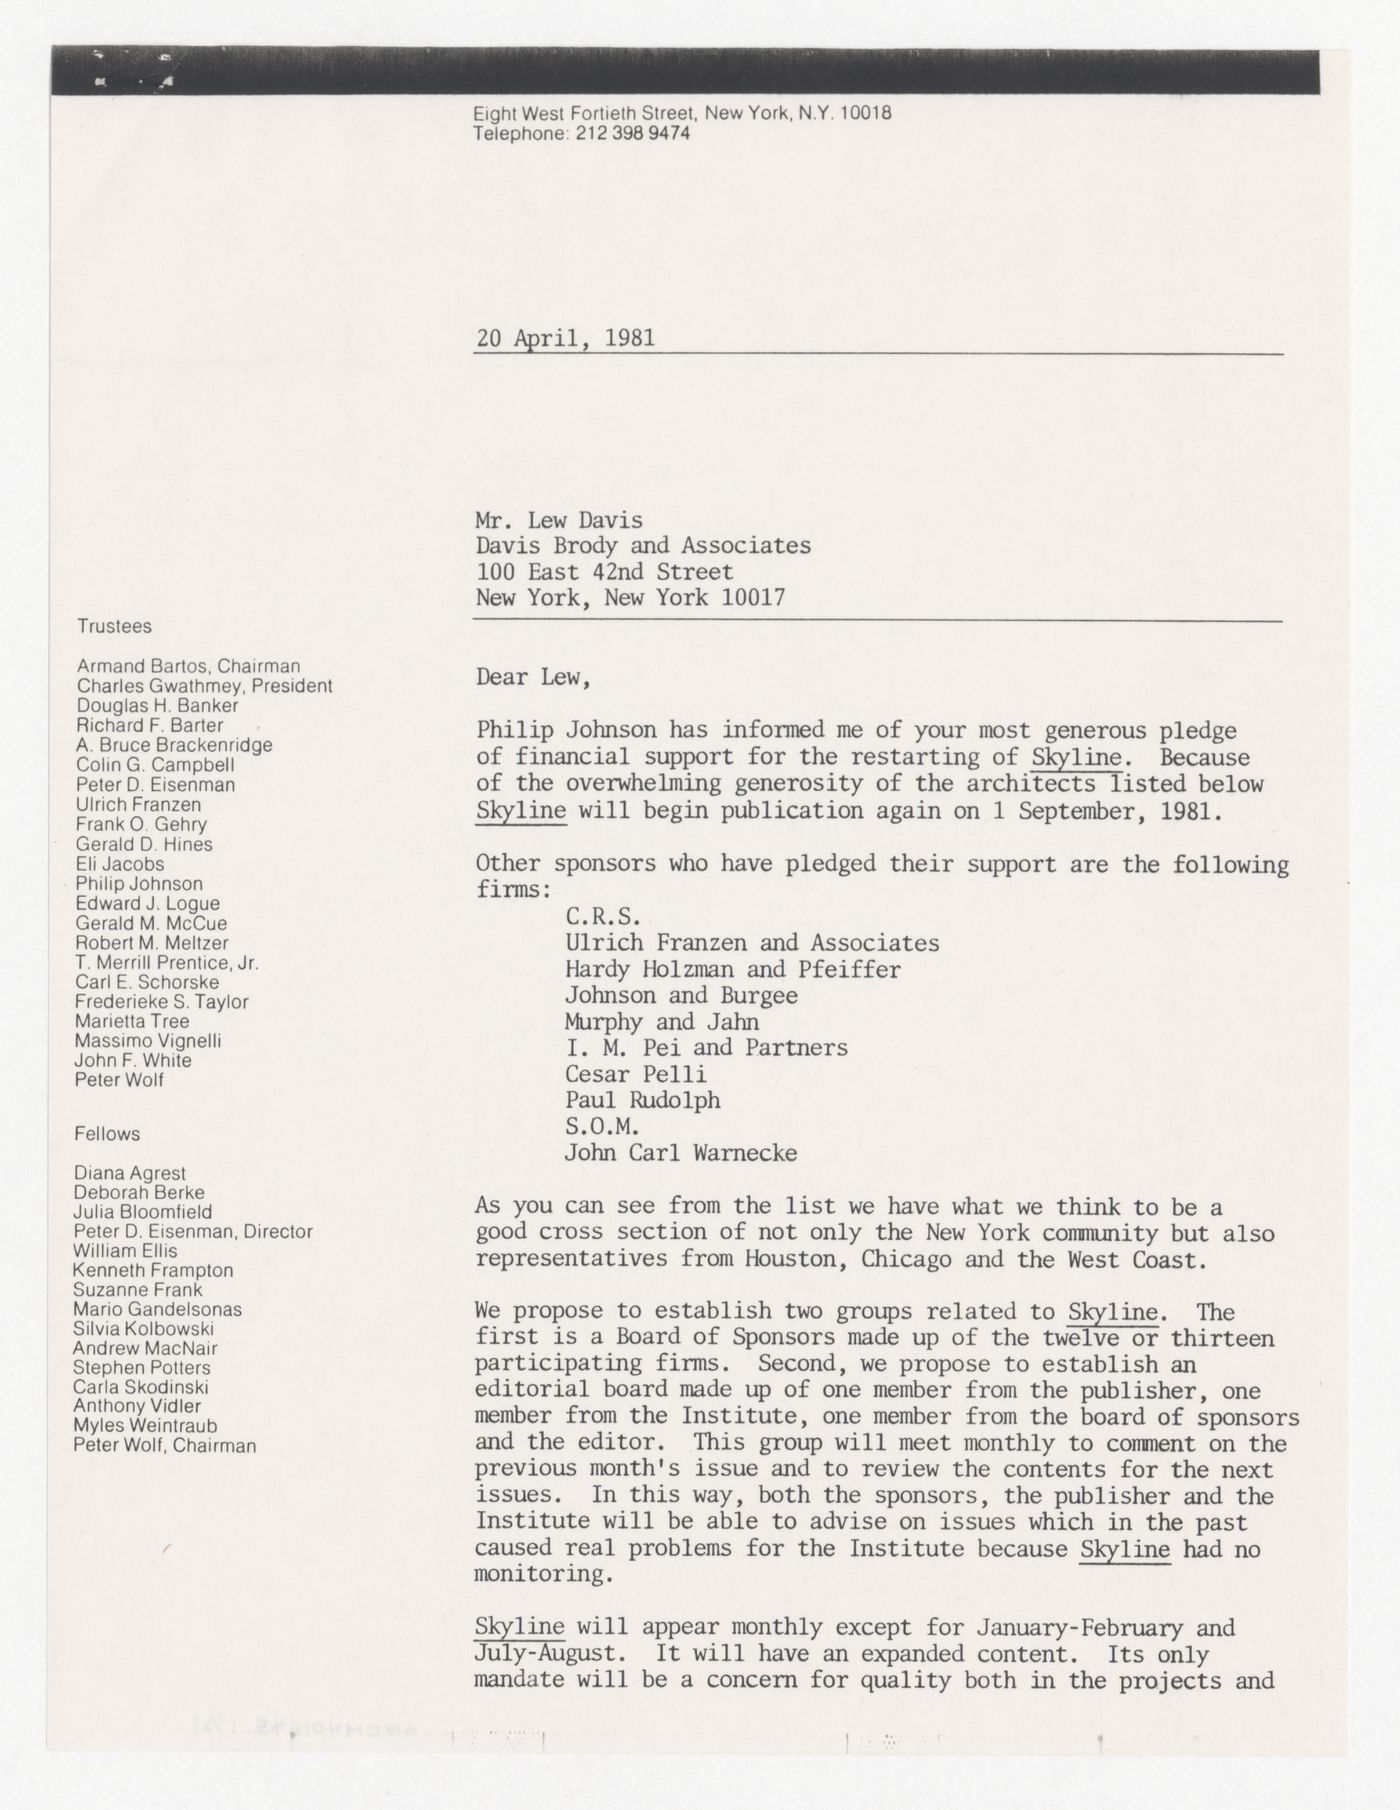 Letter from Peter D. Eisenman to Lew Davis about sponsorship for Skyline